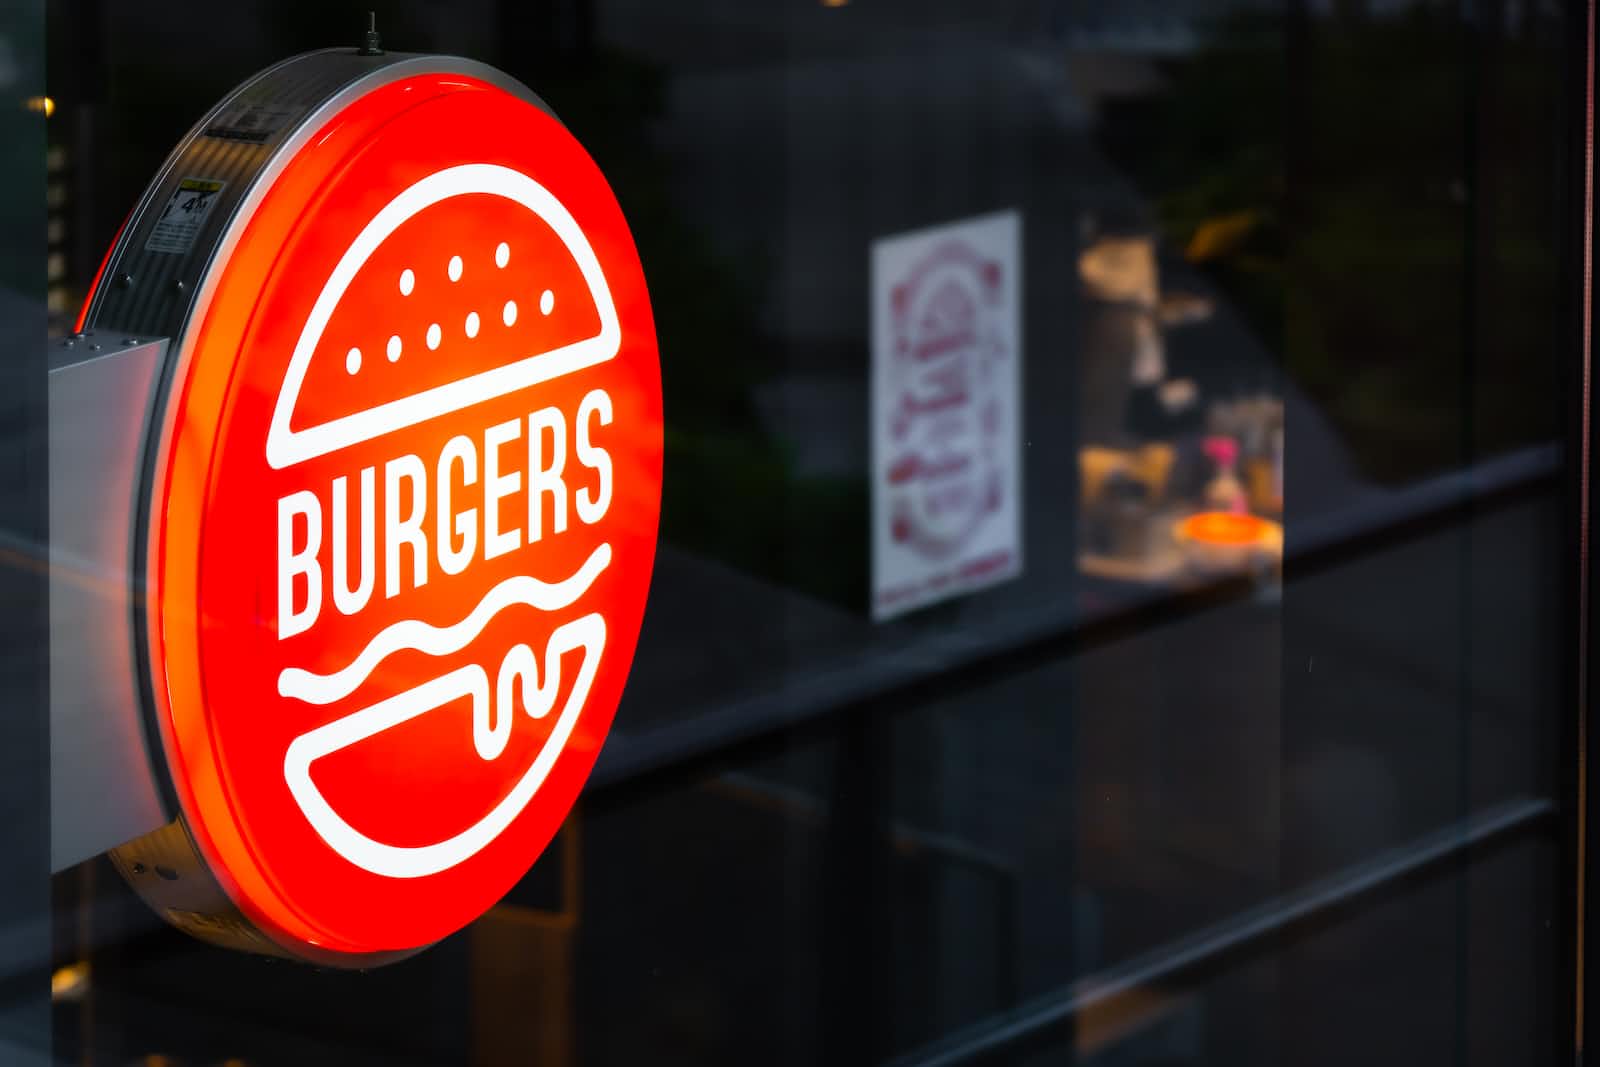 An illuminated red sign of a Burgers restaurant